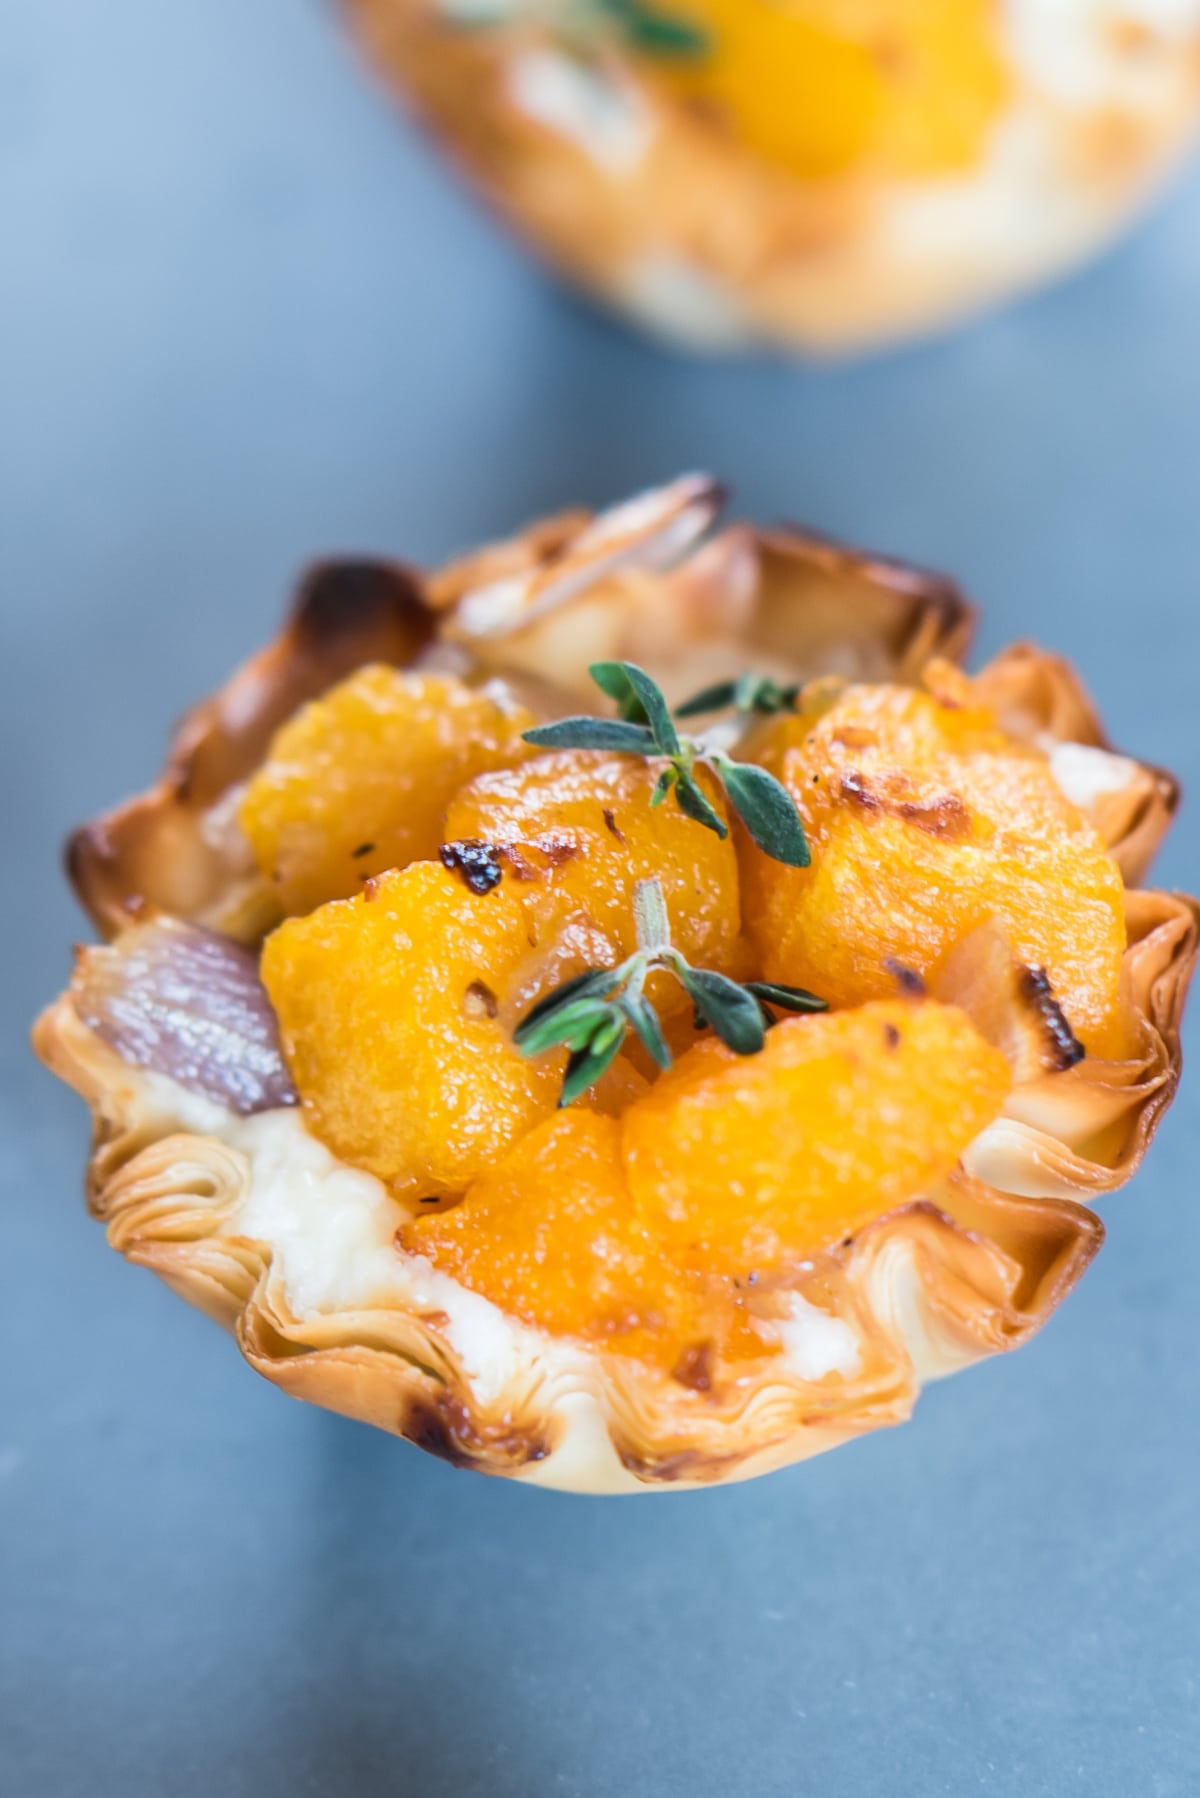 Butternut squash bites. The best holiday appetizer